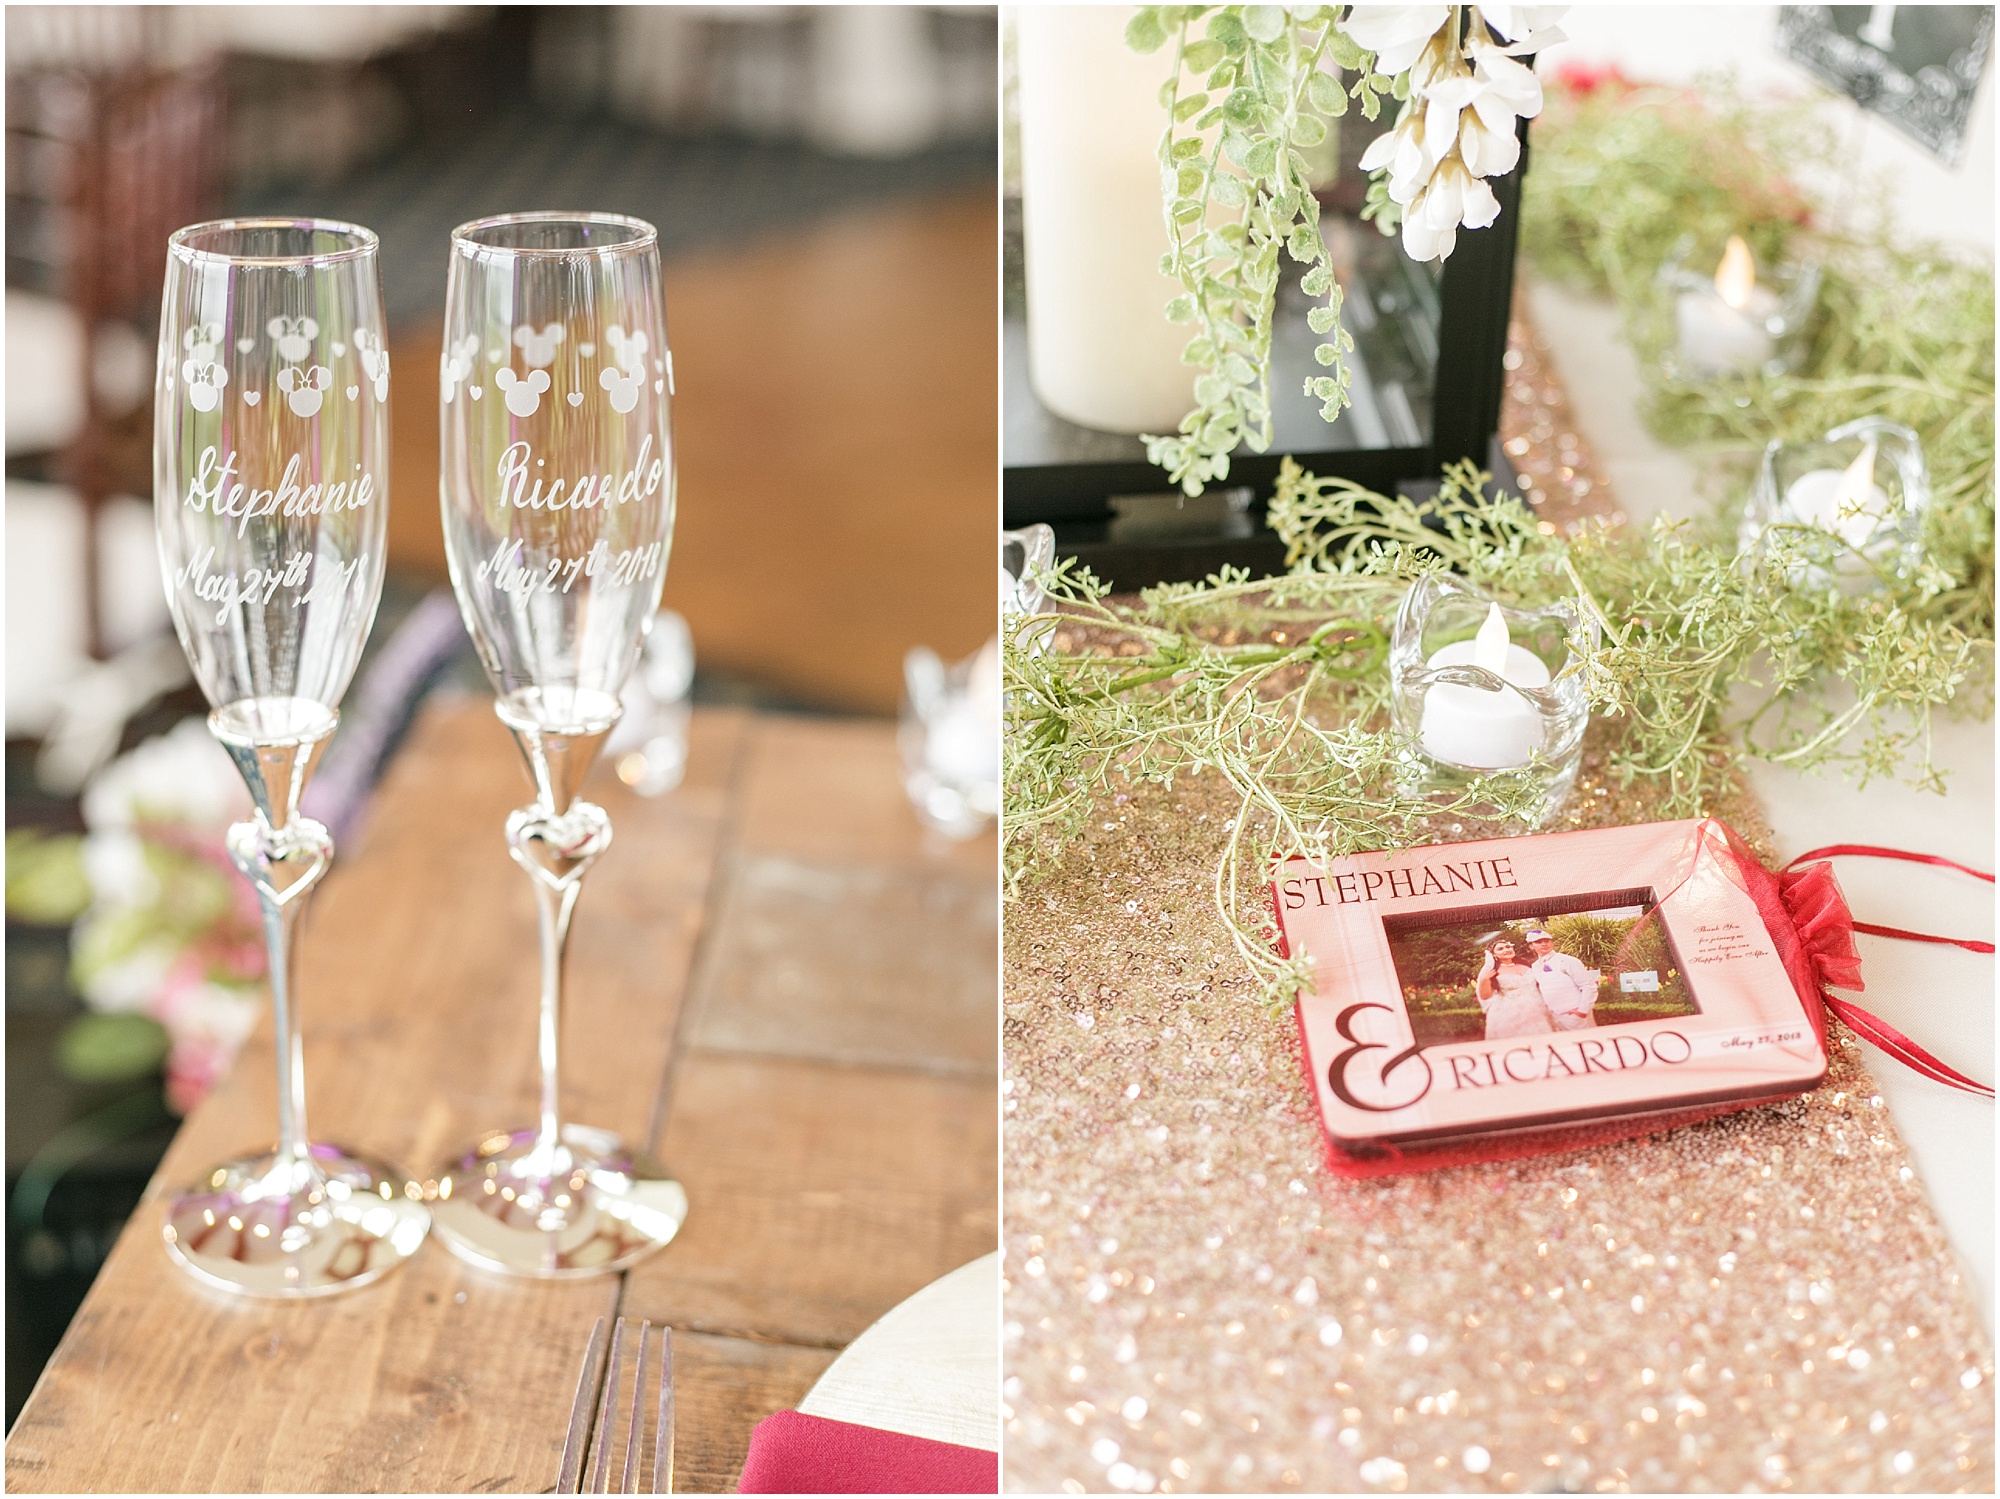 Champagne glasses for the newlyweds and some old photos of them. 